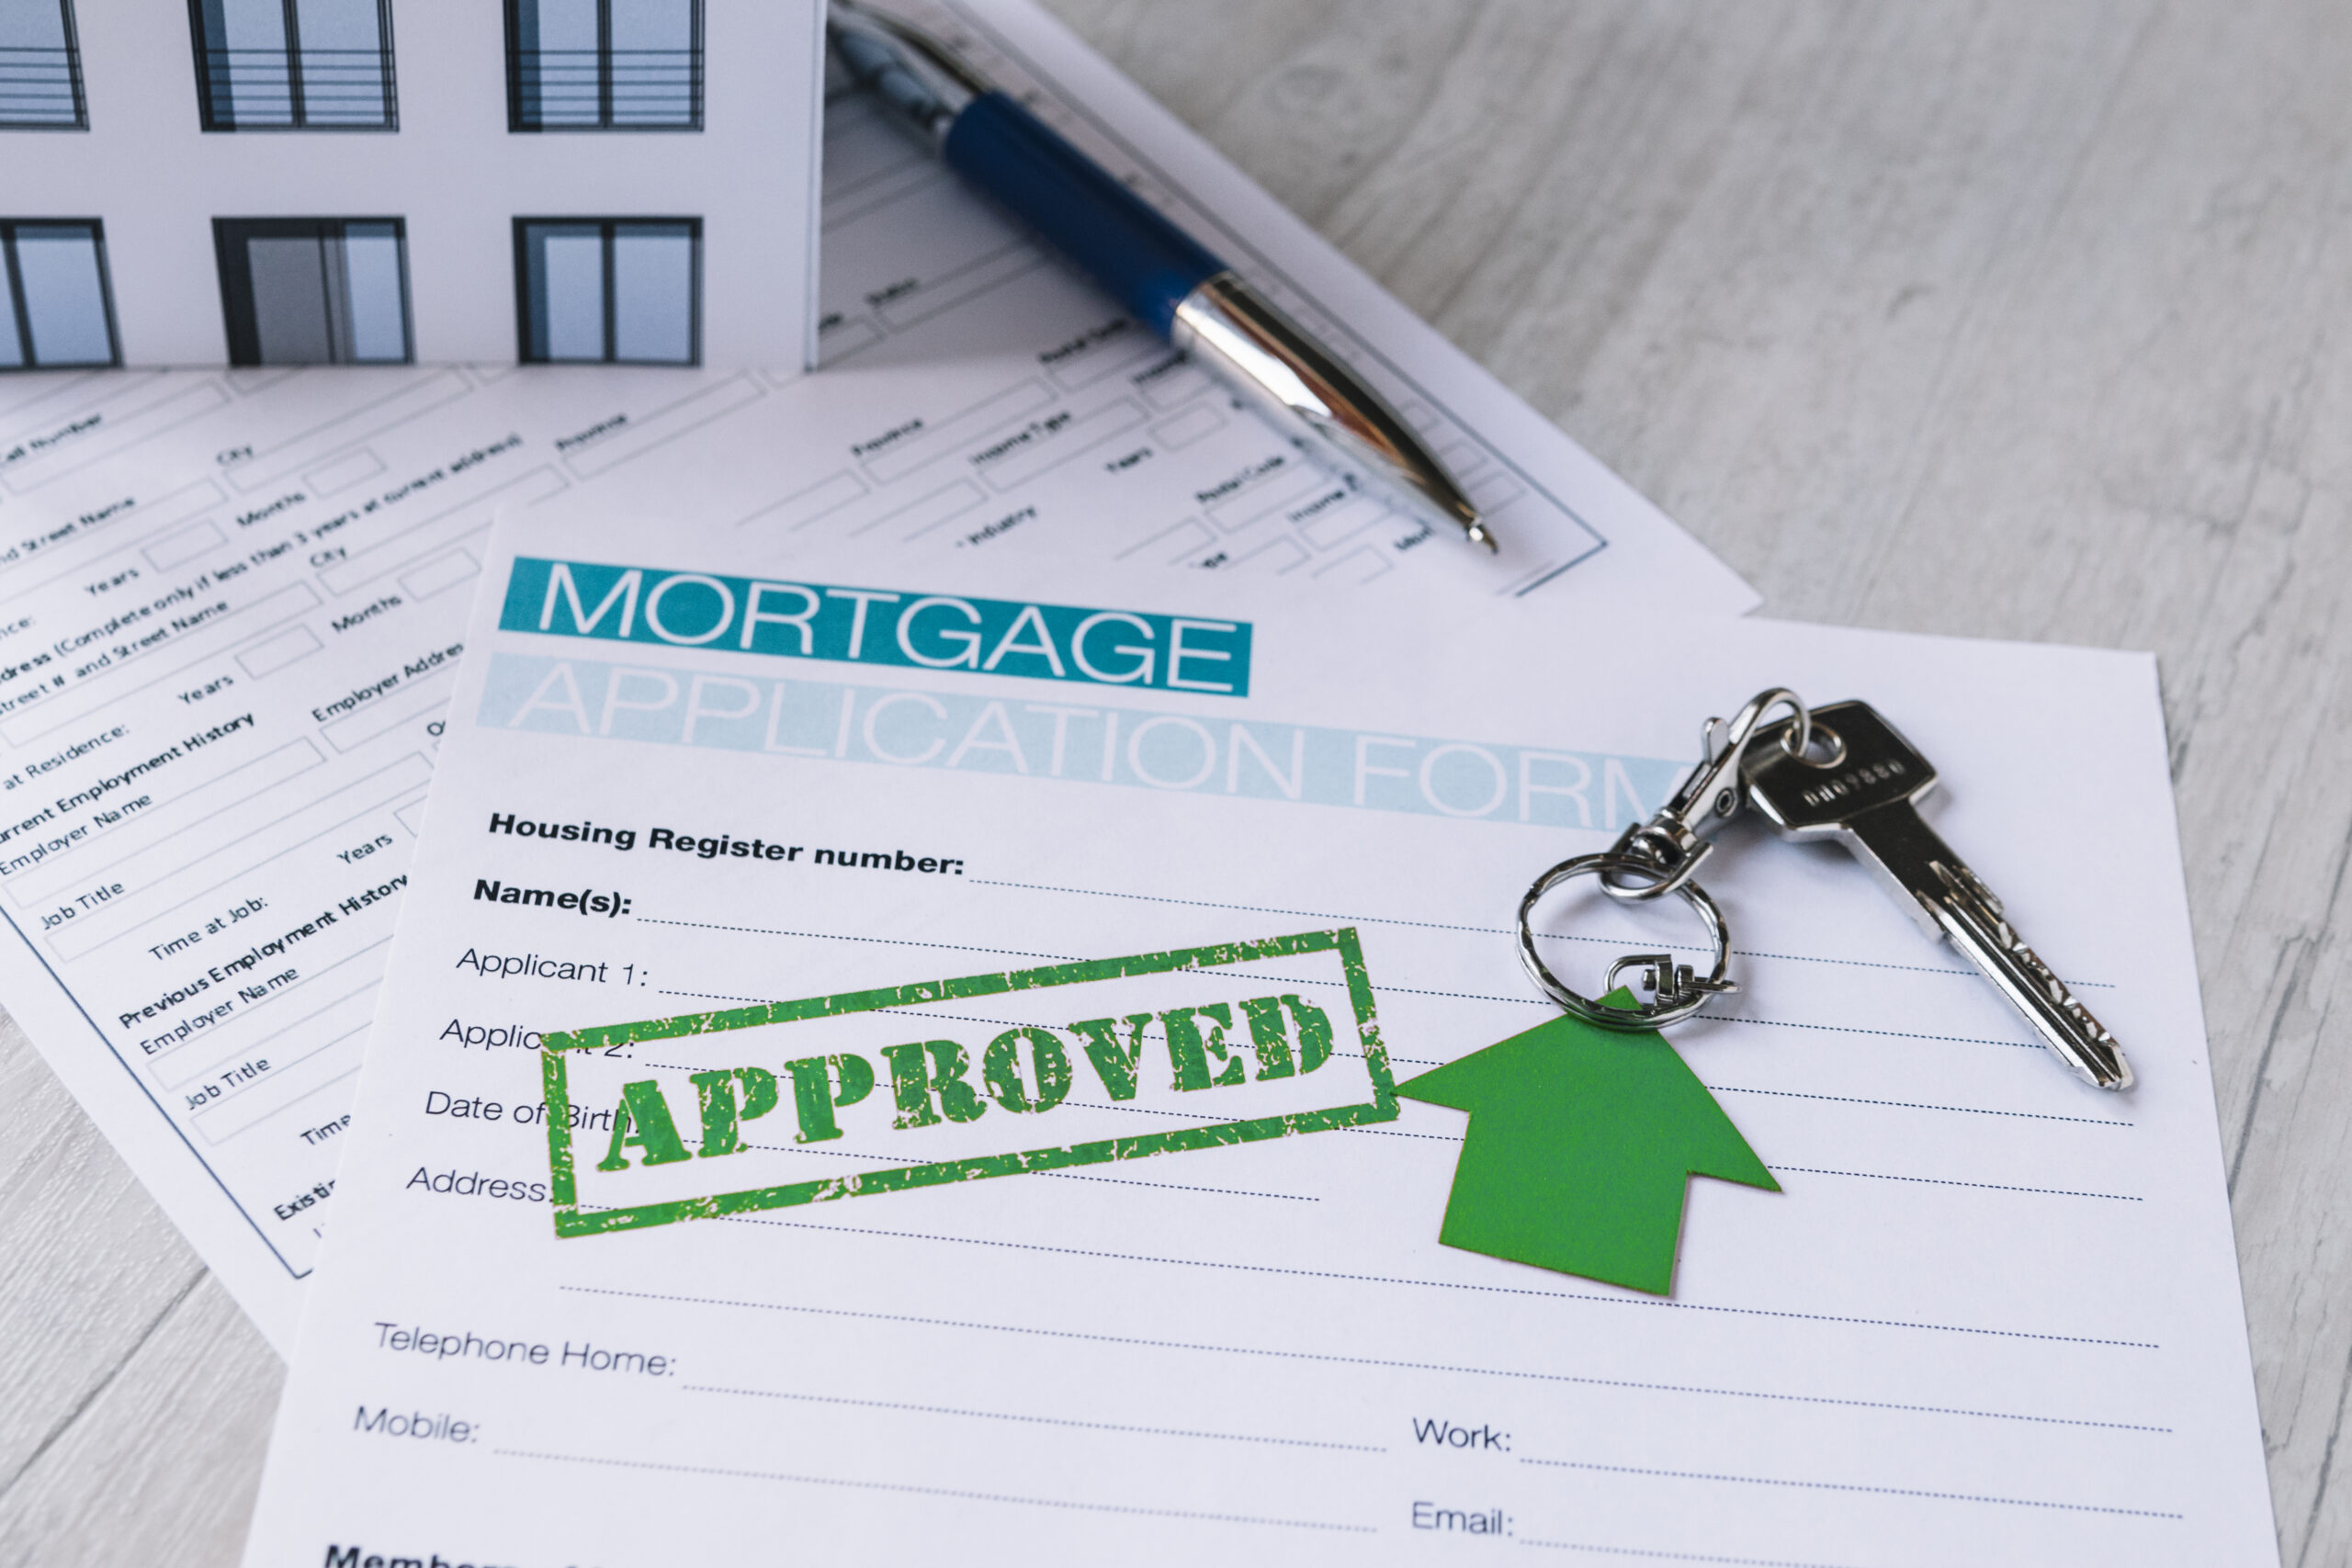 How to Increase the Mortgage Pre-Approval Amount?